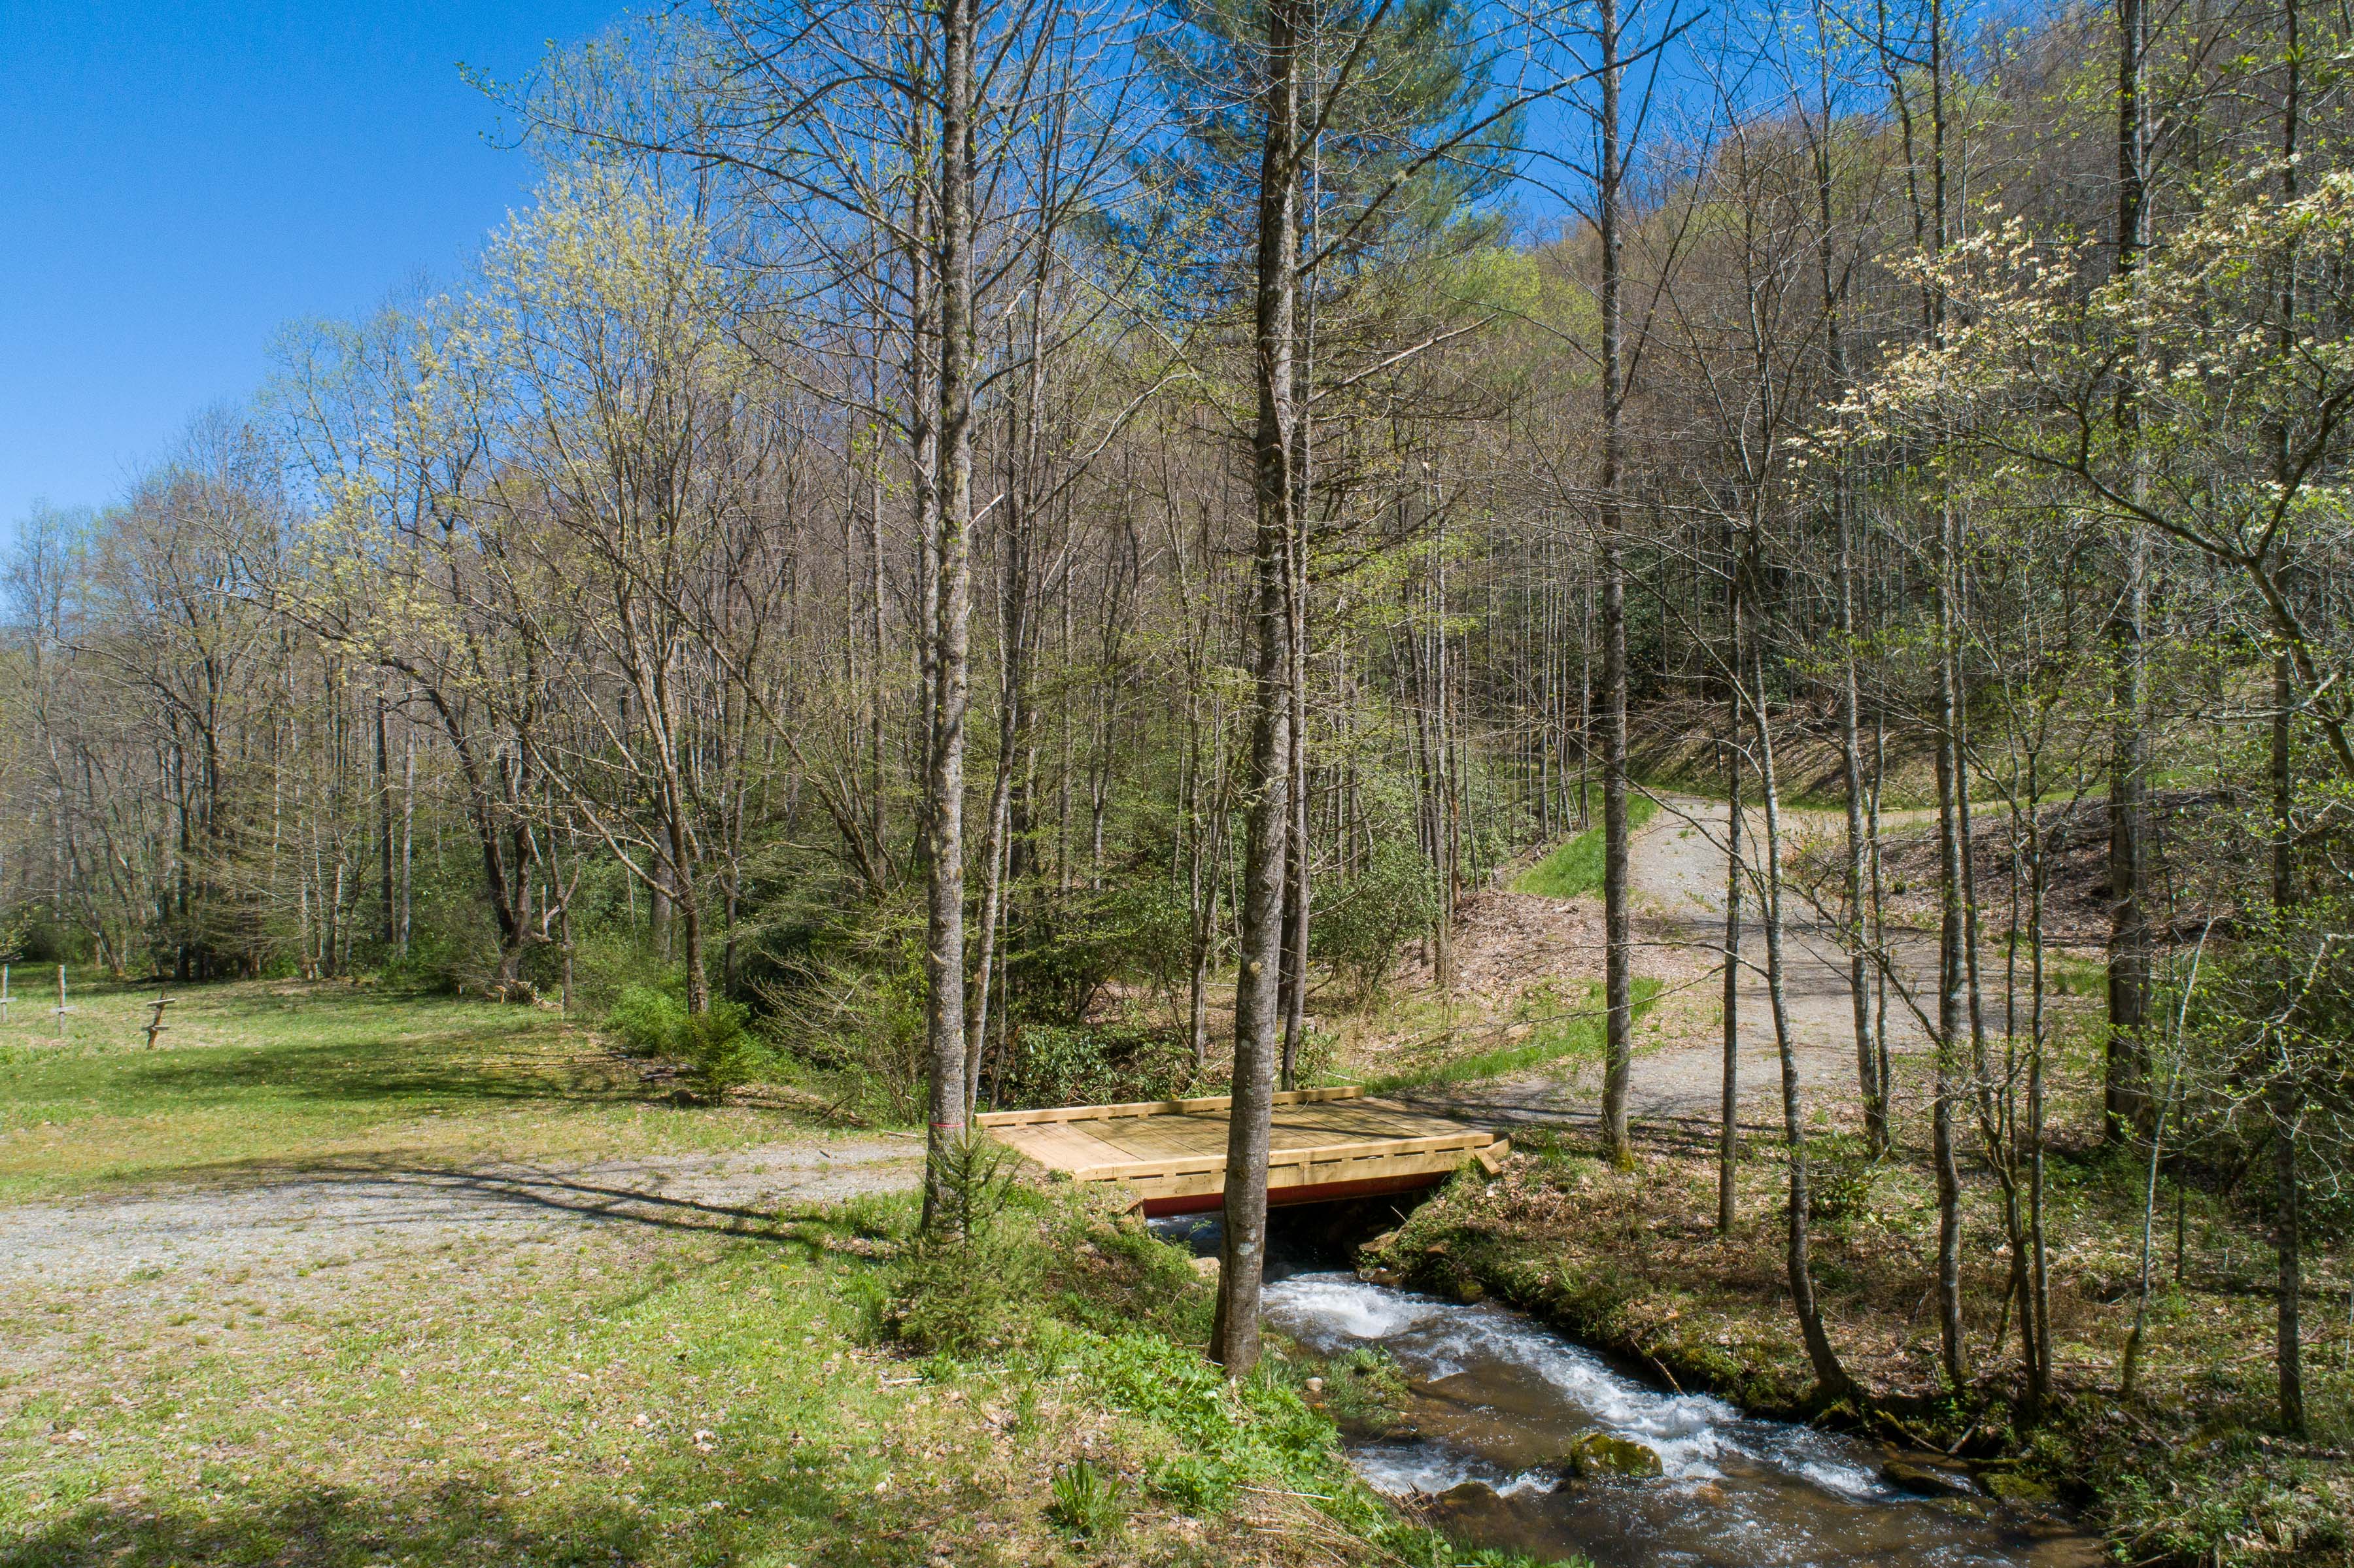 Come listen to the calming sound of Tilley Creek and multiple tributaries on this very private piece of land just minutes from Western Carolina University.